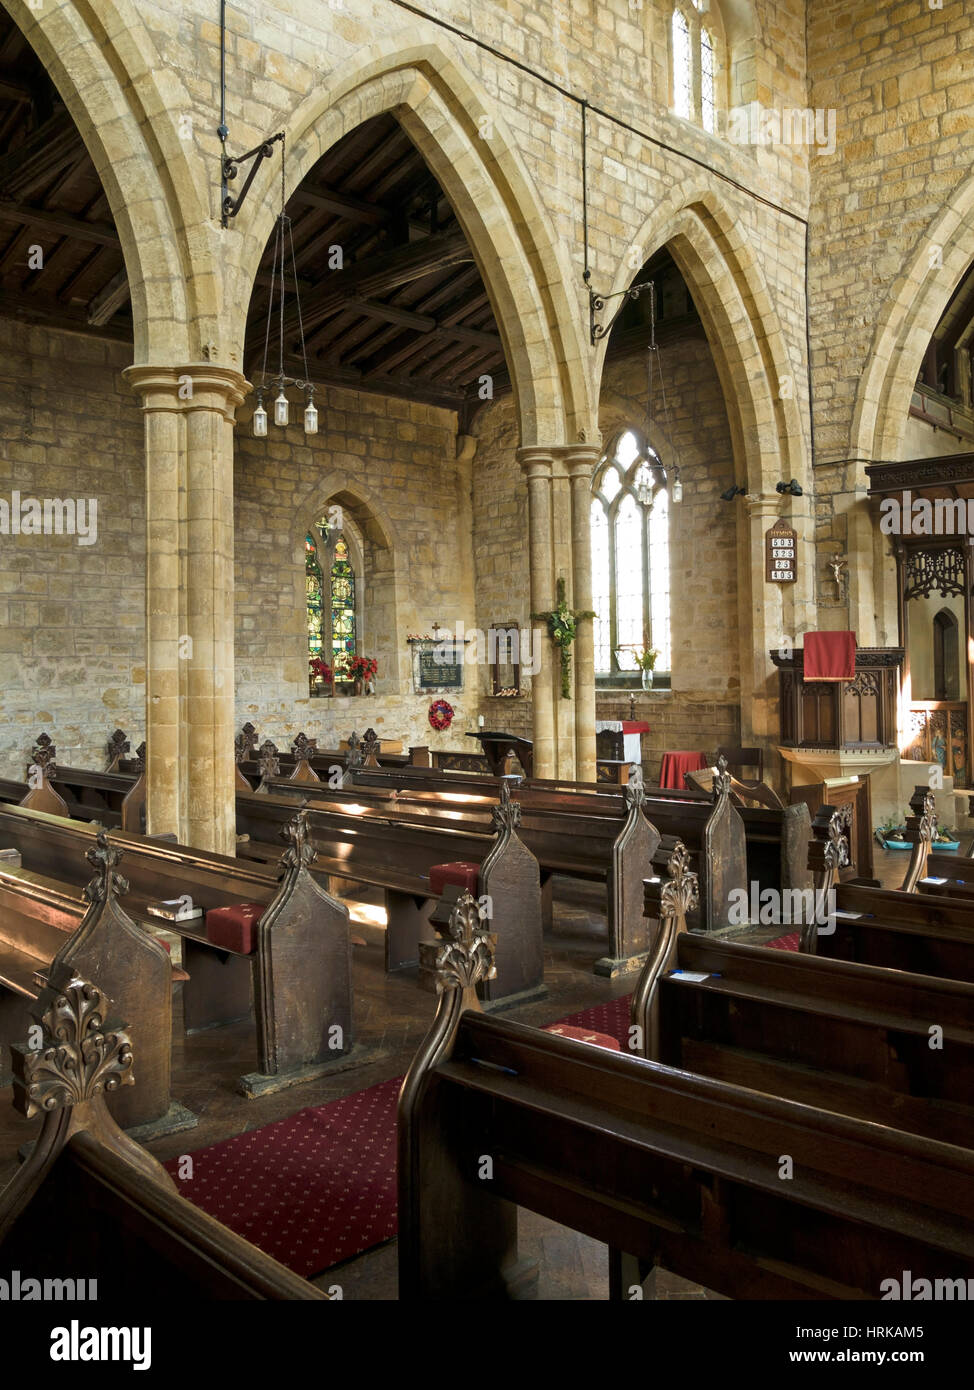 Gothic arches, stone pillars and pews inside, All Saints Church, Hoby, Leicestershire, England, UK Stock Photo